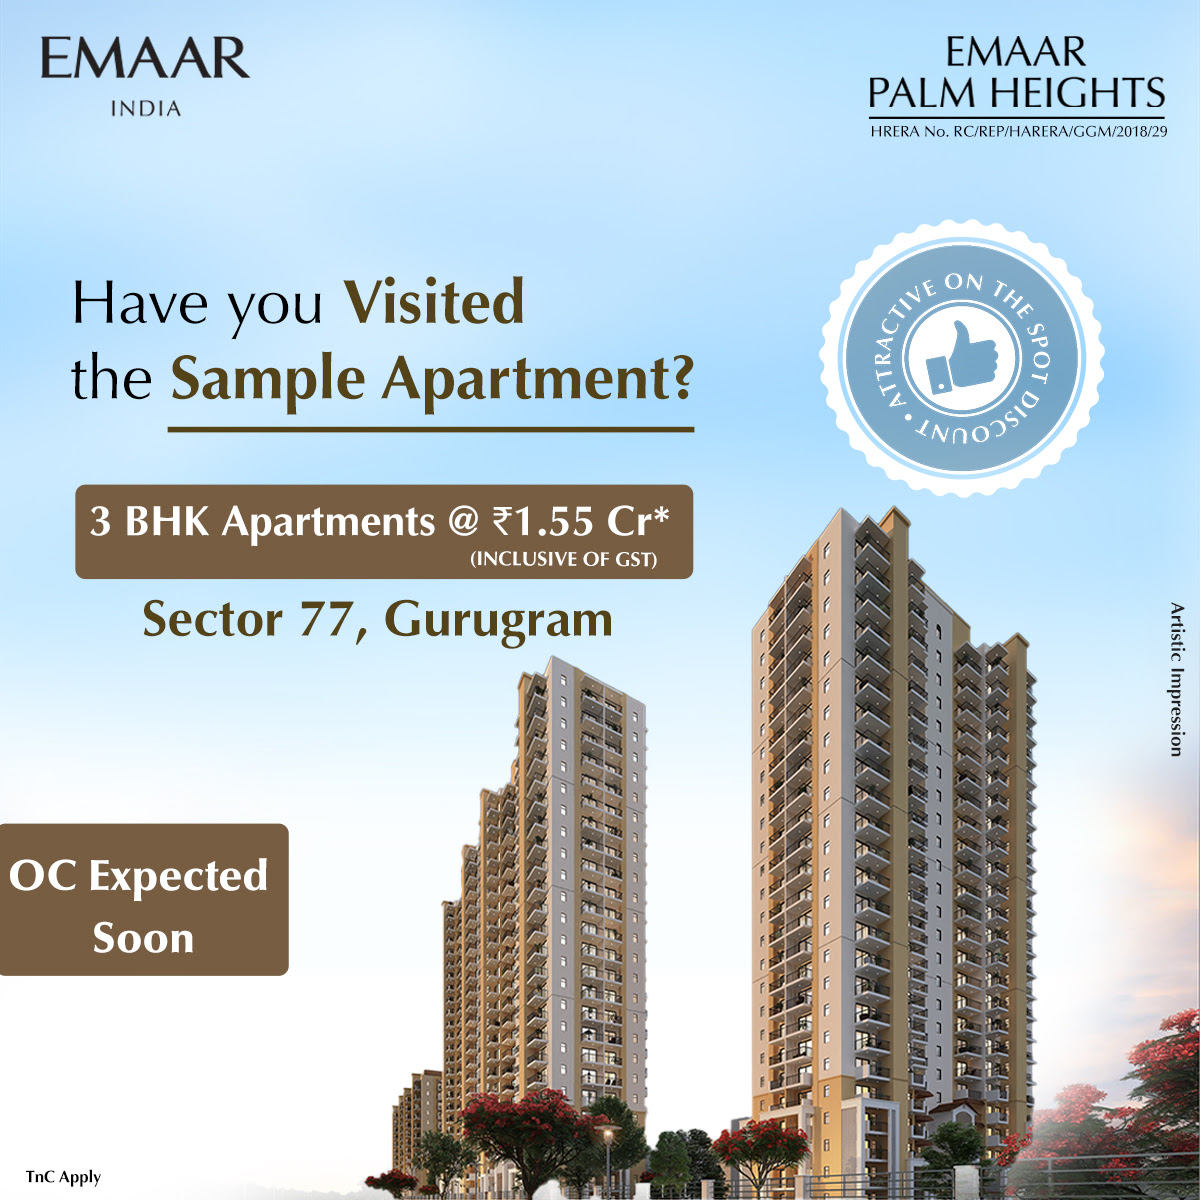 OC Expected soon at Emaar Palm Heights in Sector 77, Gurgaon Update